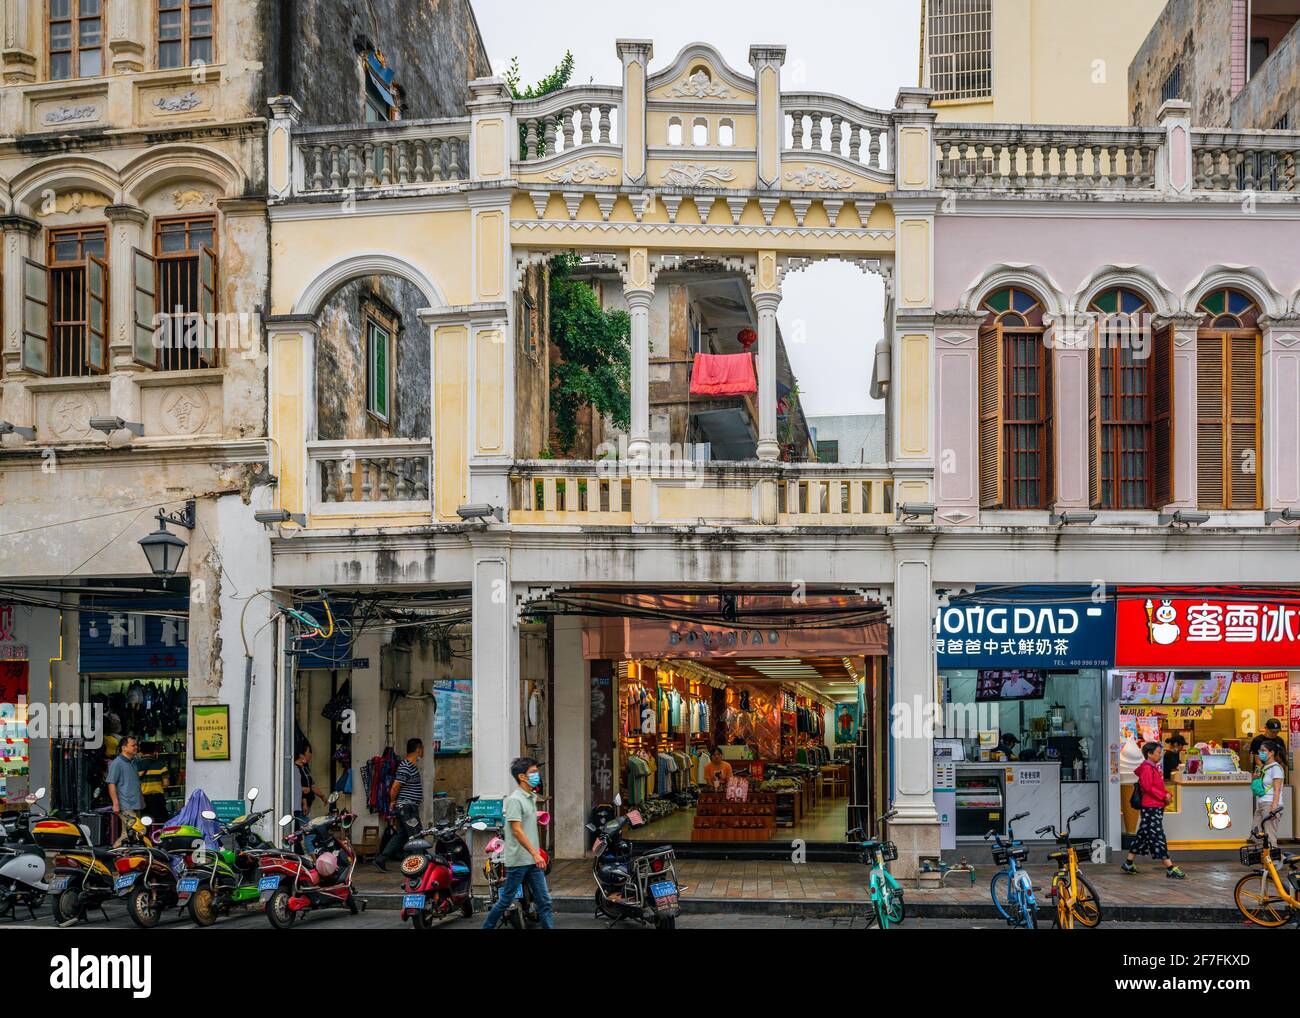 Haikou China , 21 March 2021 : Facade of old colonial sotto portico building with shop behind in Xinhua north road in Haikou Qilou old town Hainan Chi Stock Photo